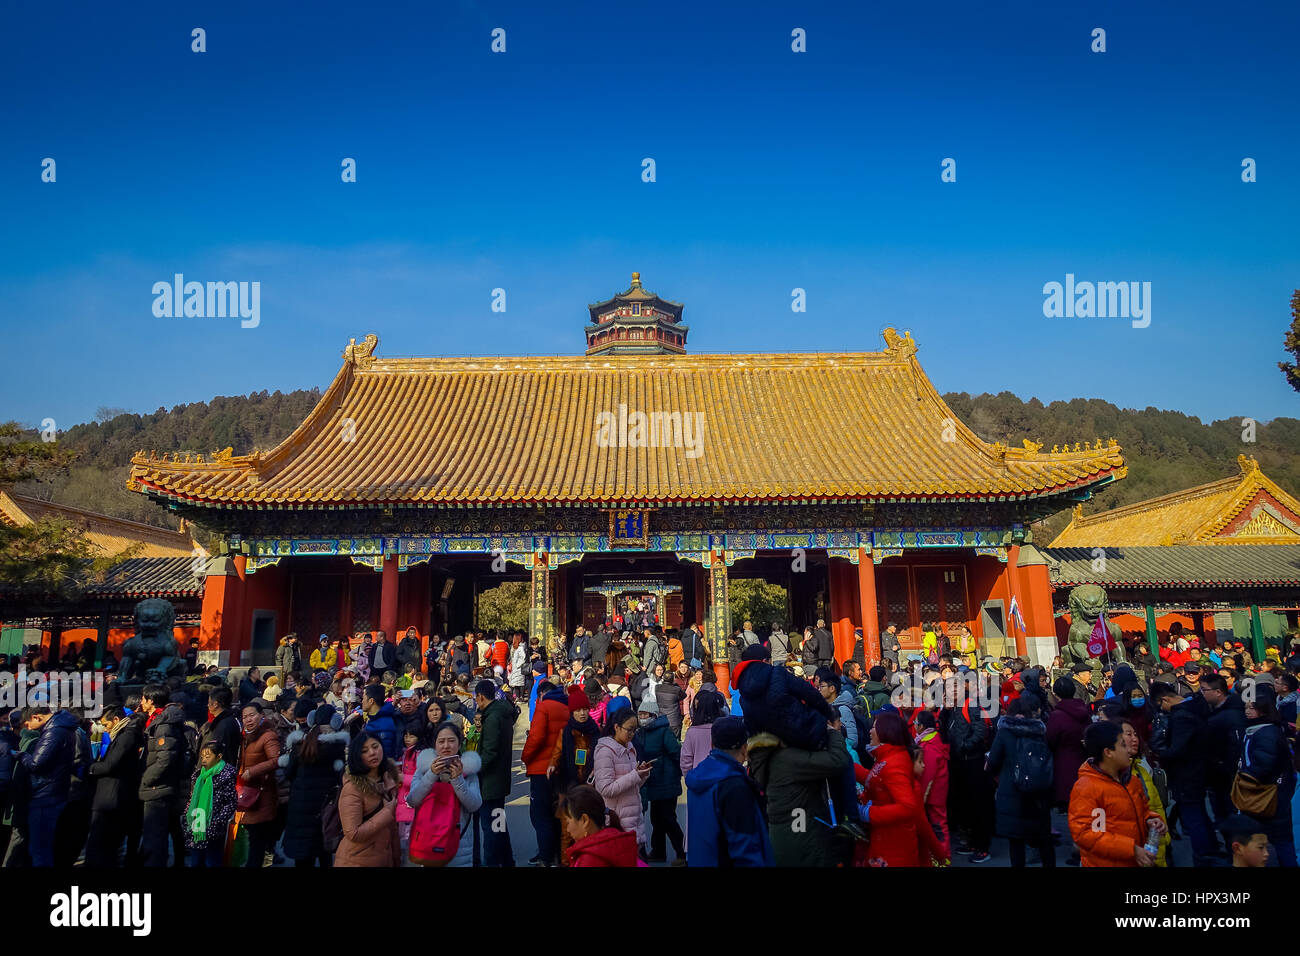 BEIJING, CHINA - 29 JANUARY, 2017: Walking around spring palace complex, a spectacular ensemble of lakes, gardens and ancient chinese palaces, beautif Stock Photo